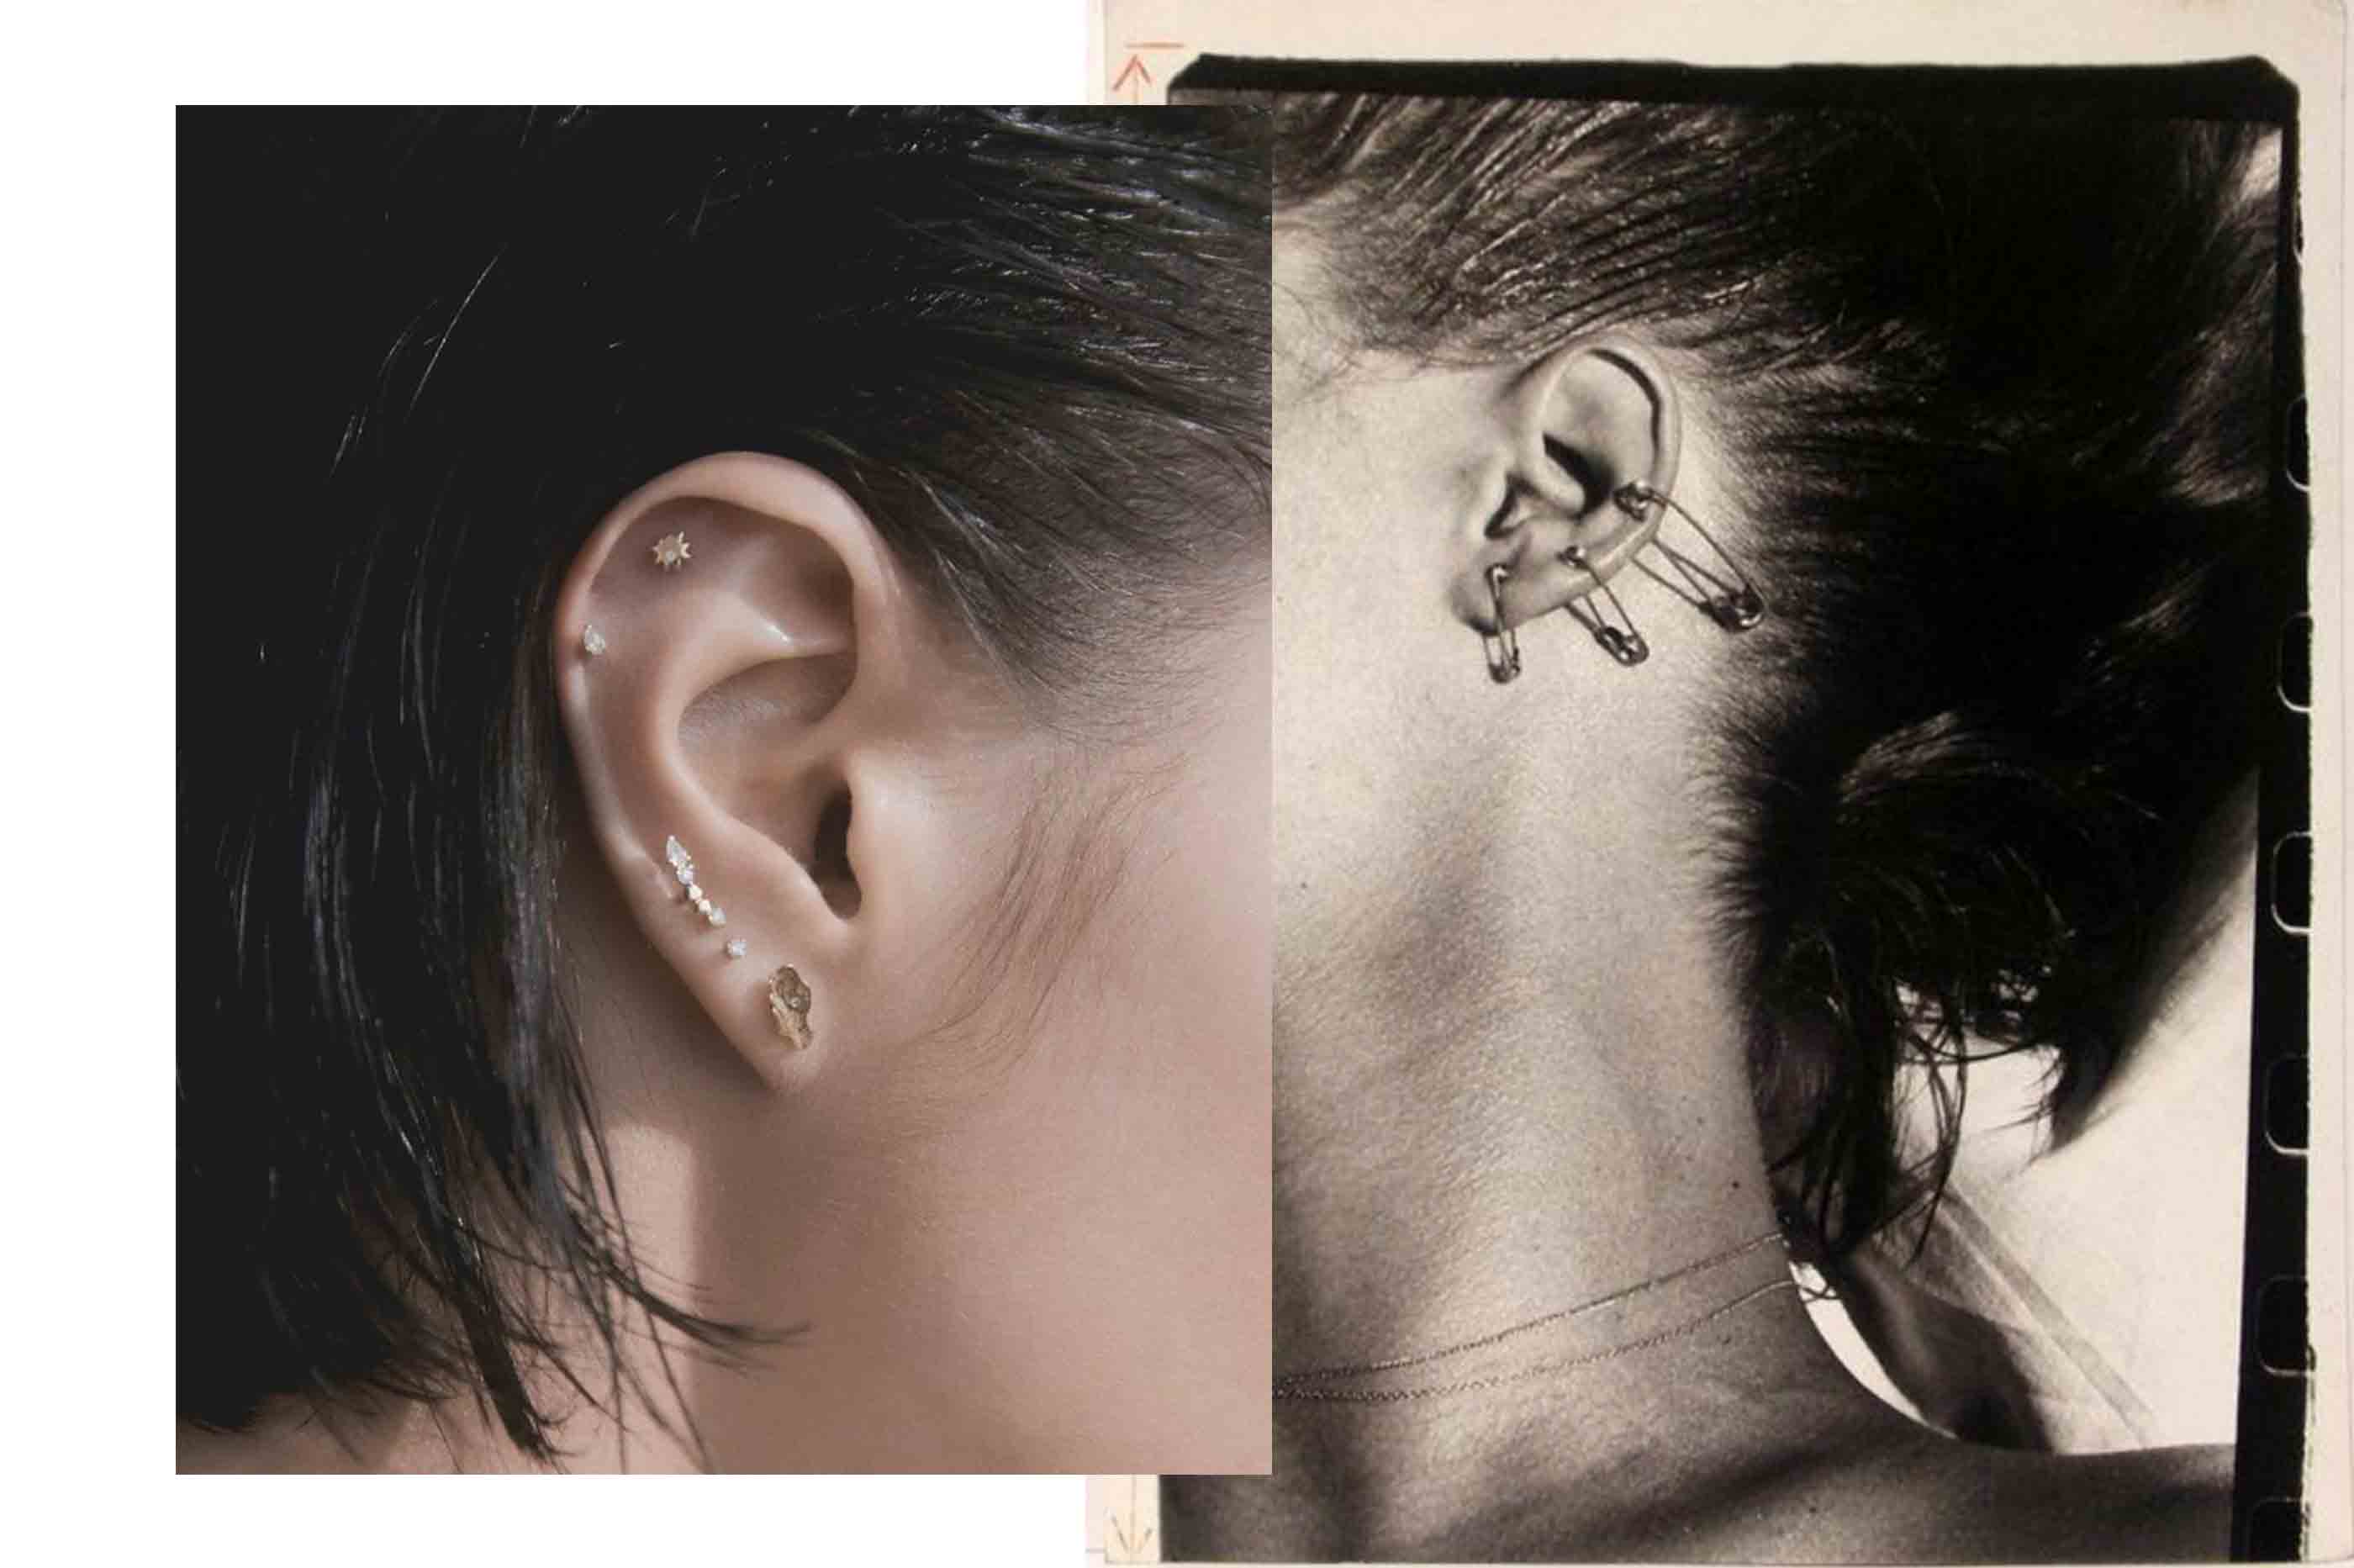 Your Guide To Cartilage Ear Piercings: 10 Types To Know